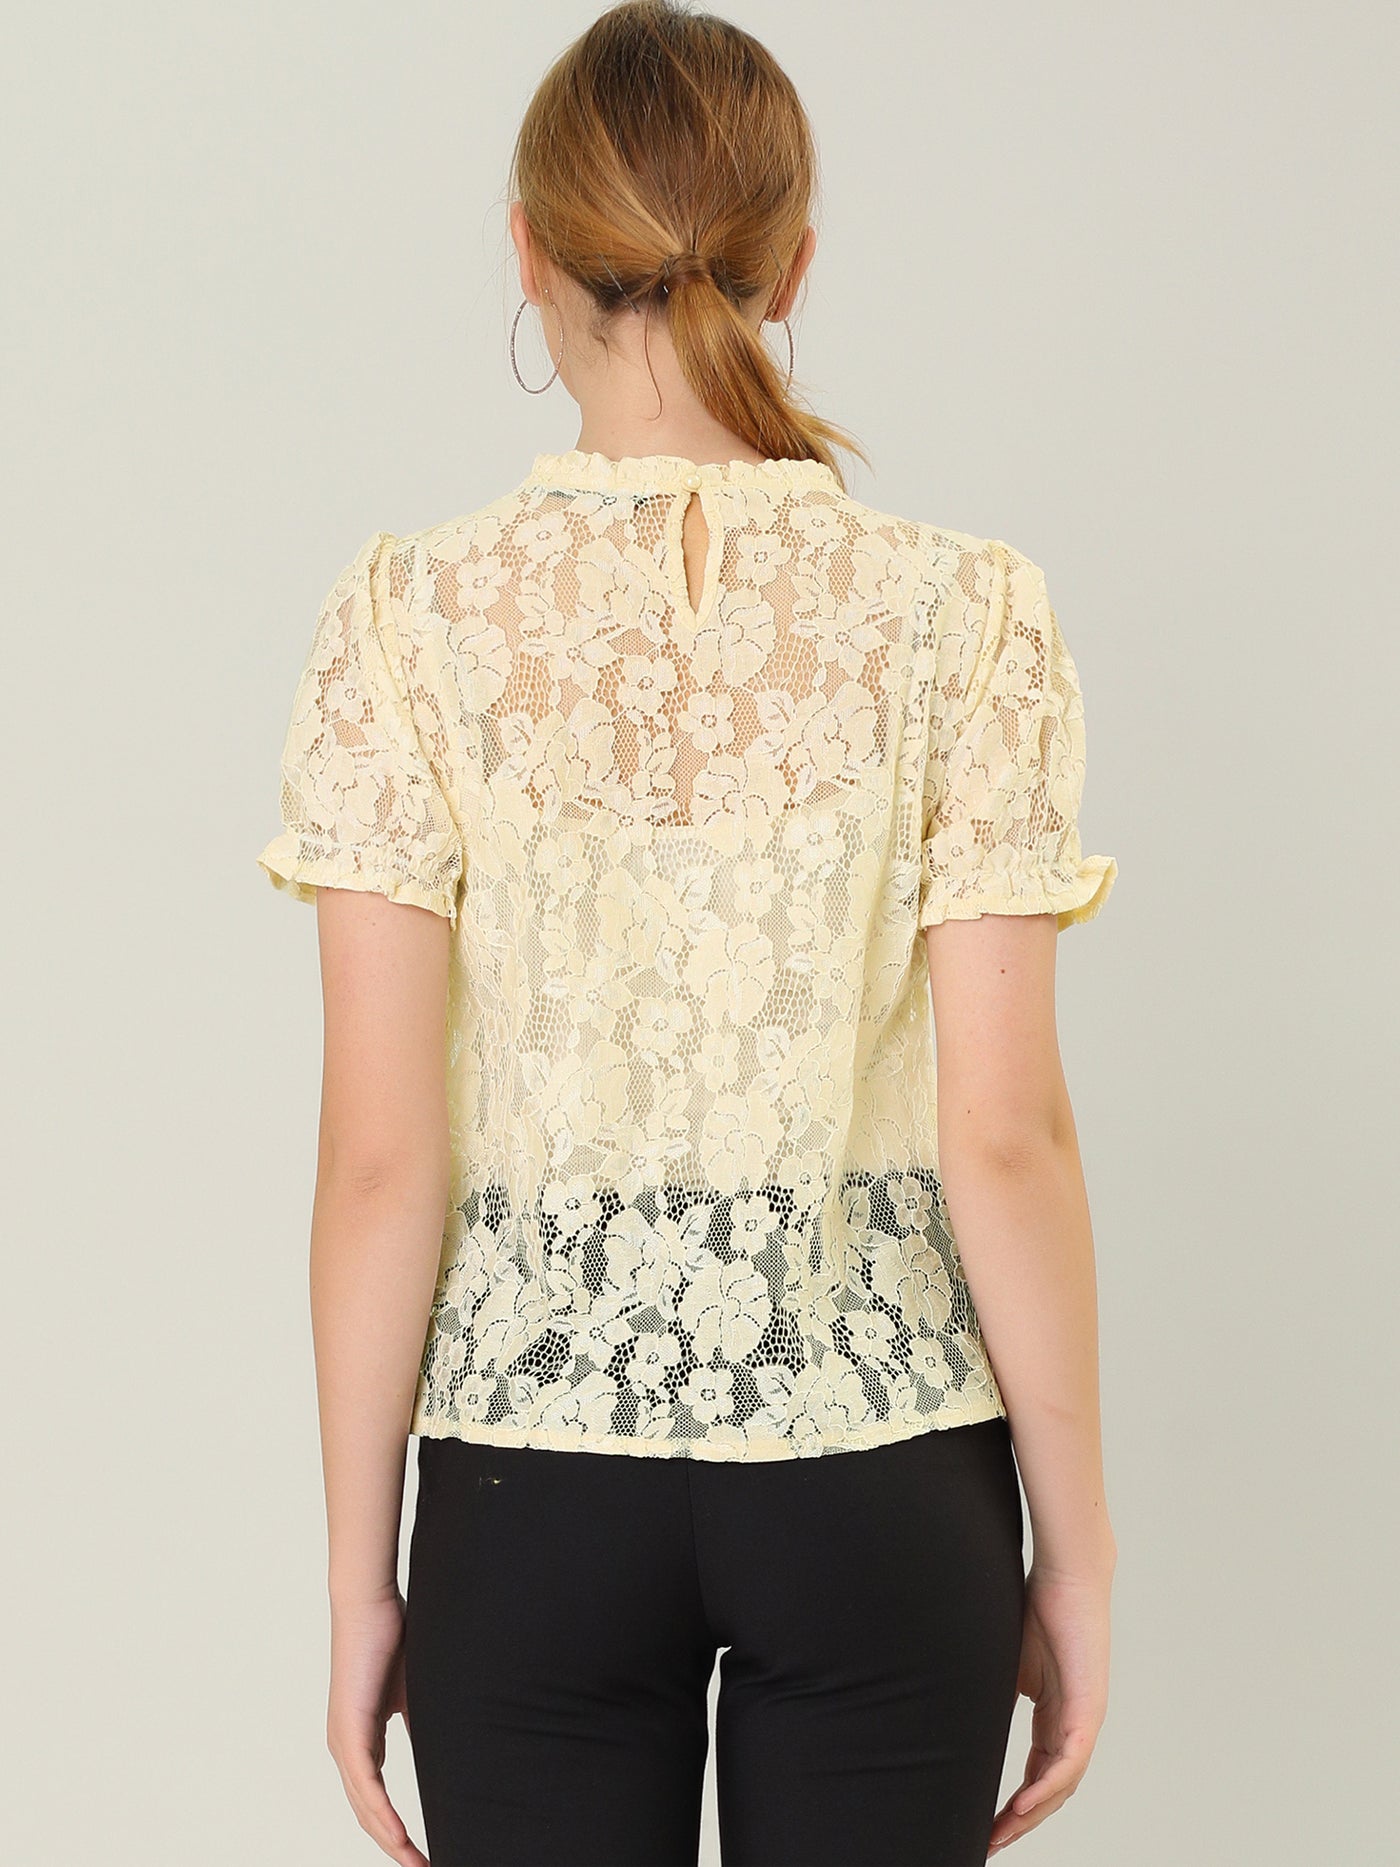 Allegra K Puff Short Sleeve Ruffle Neck See-Through Floral Lace Top